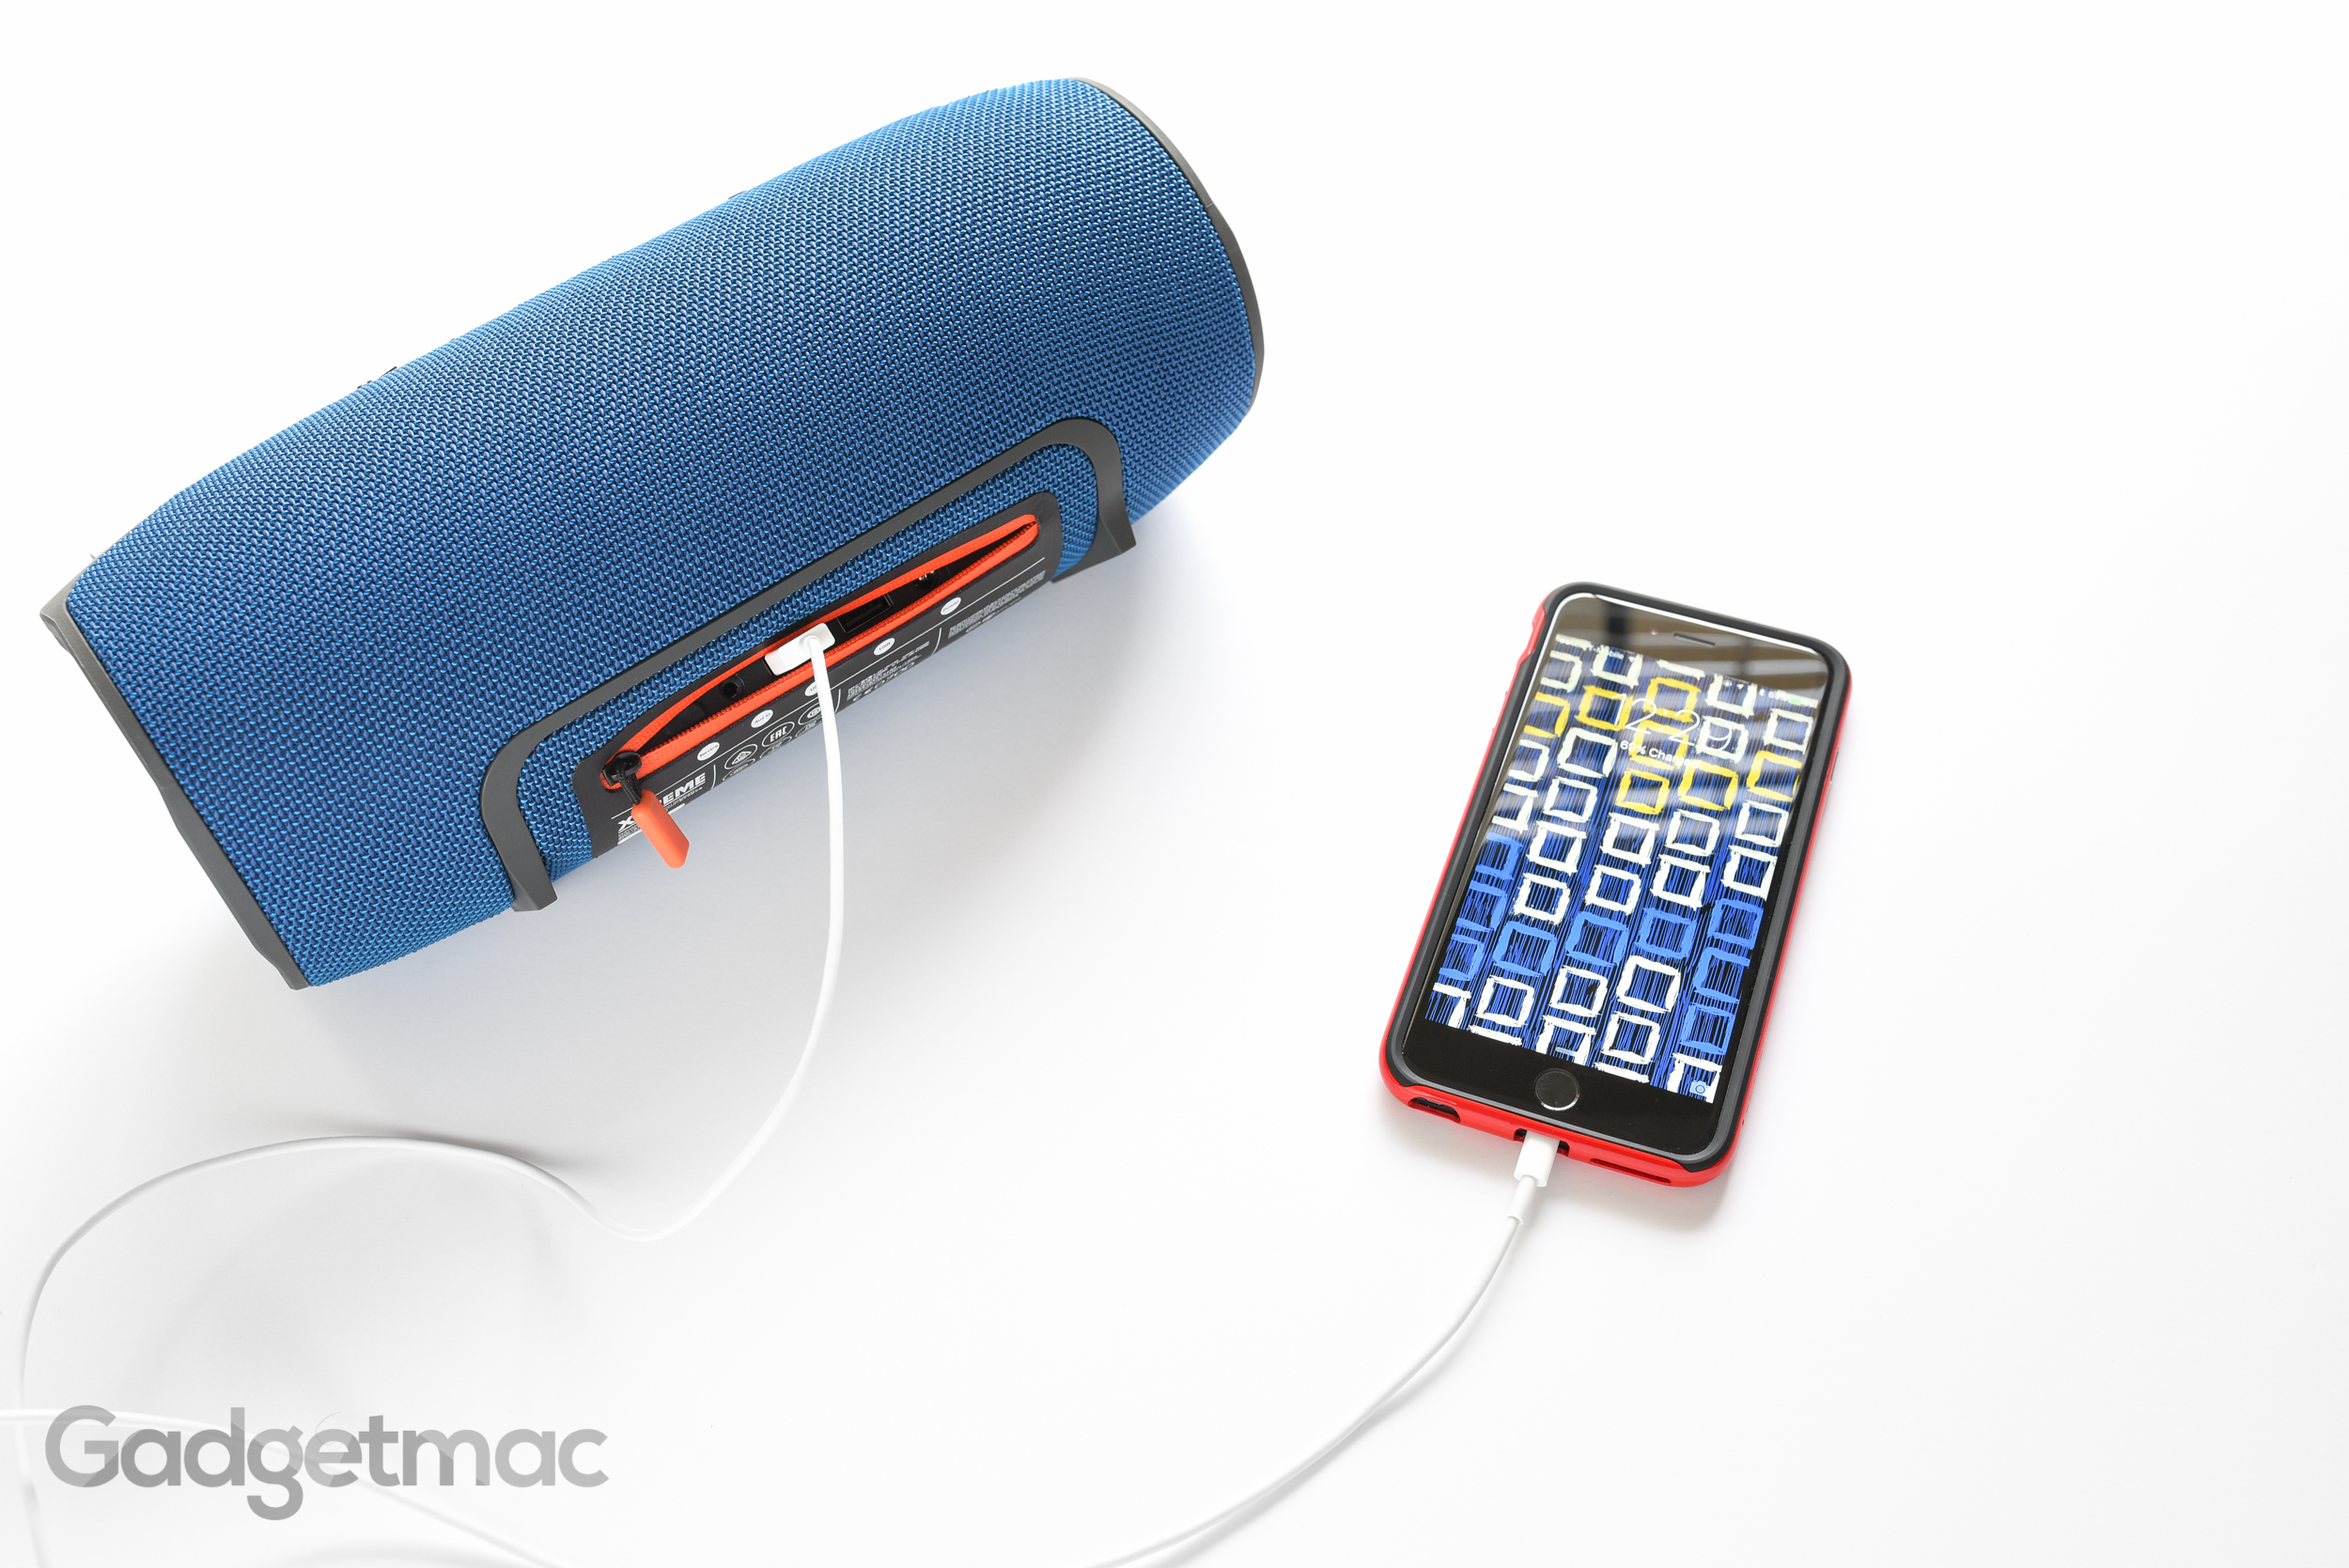 charge jbl xtreme with usb